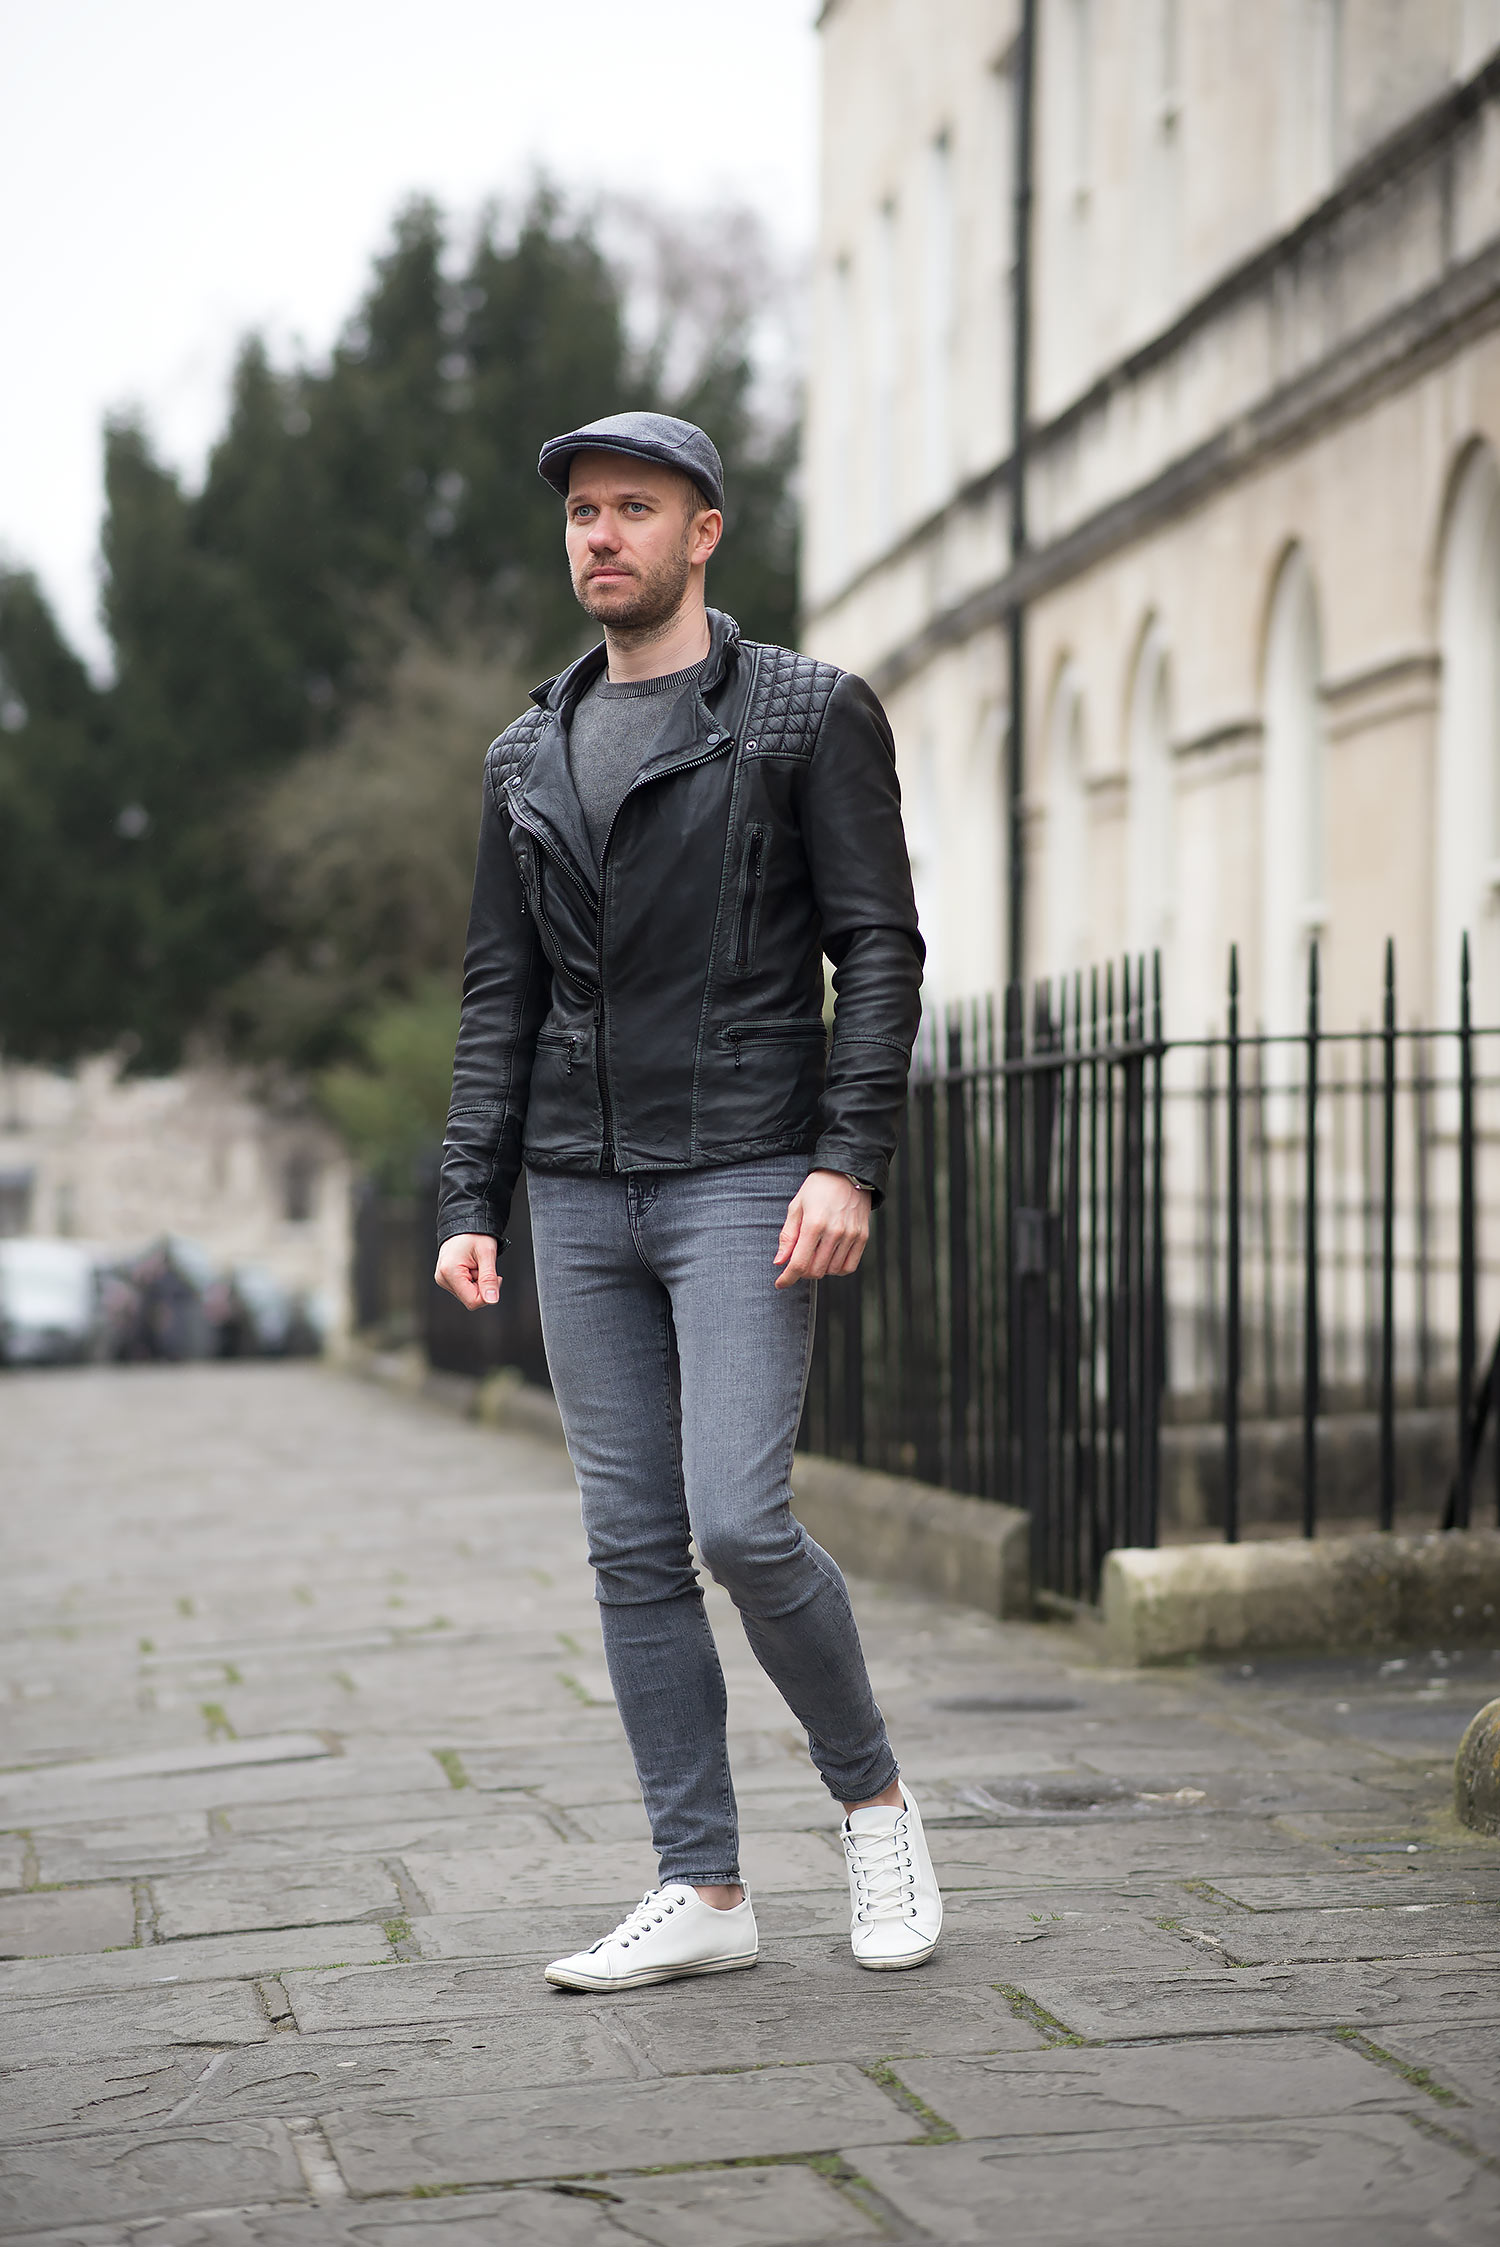 Skinny Jeans with Fashion Tips Allsaints Cargo Biker Leather Jacket And Flat Cap Outfit 